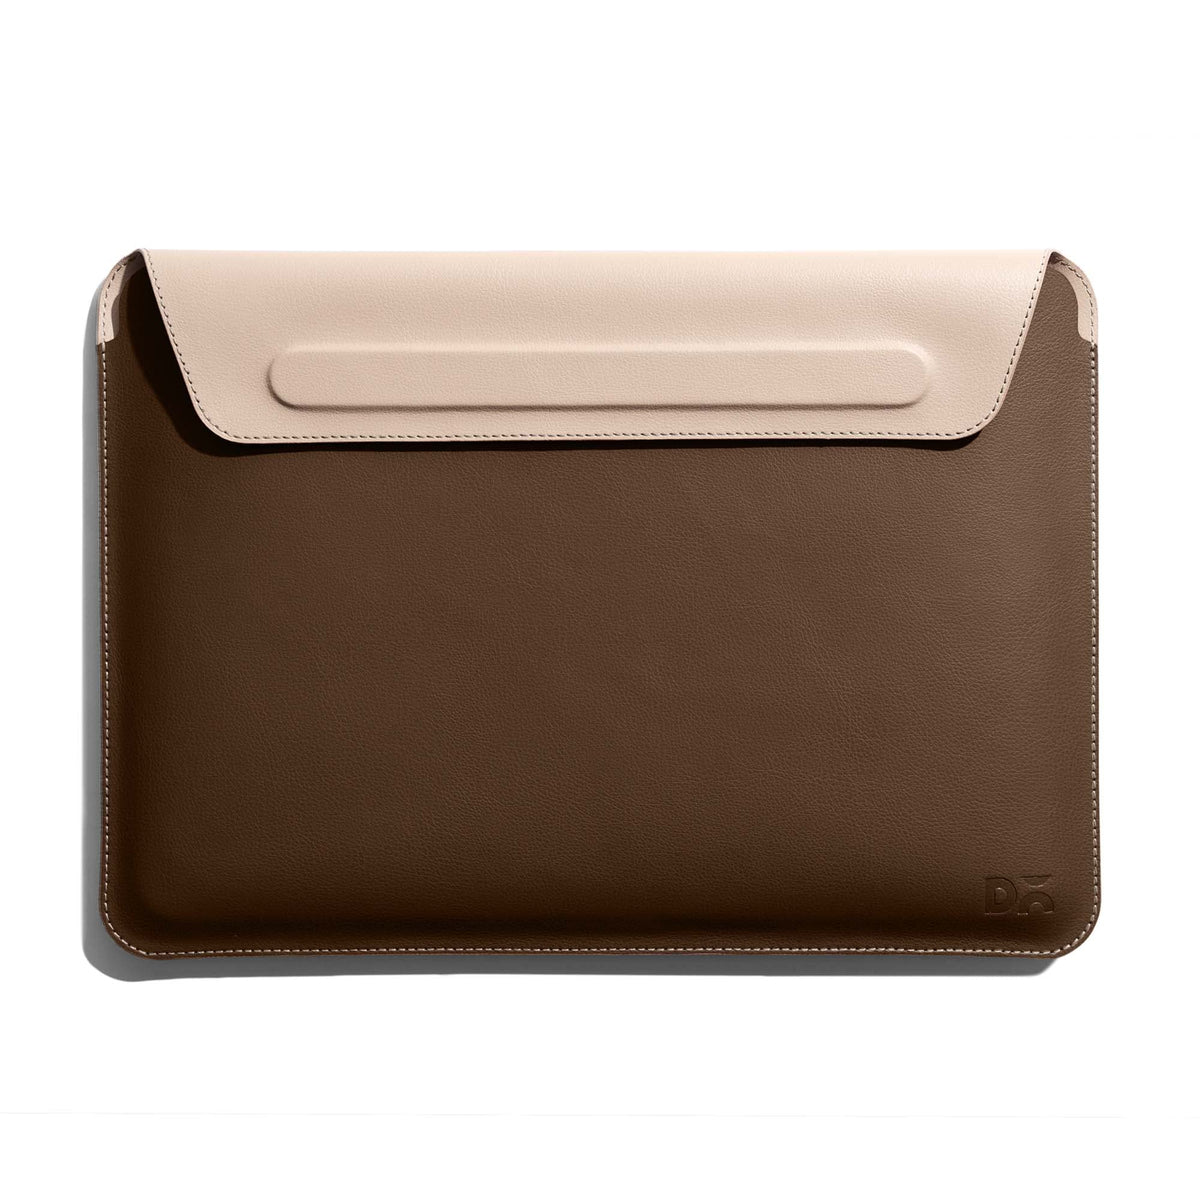 DailyObjects Walnut Brown SnapOn Envelope Sleeve for MacBook Air/Pro 33.02cm (13 inch)